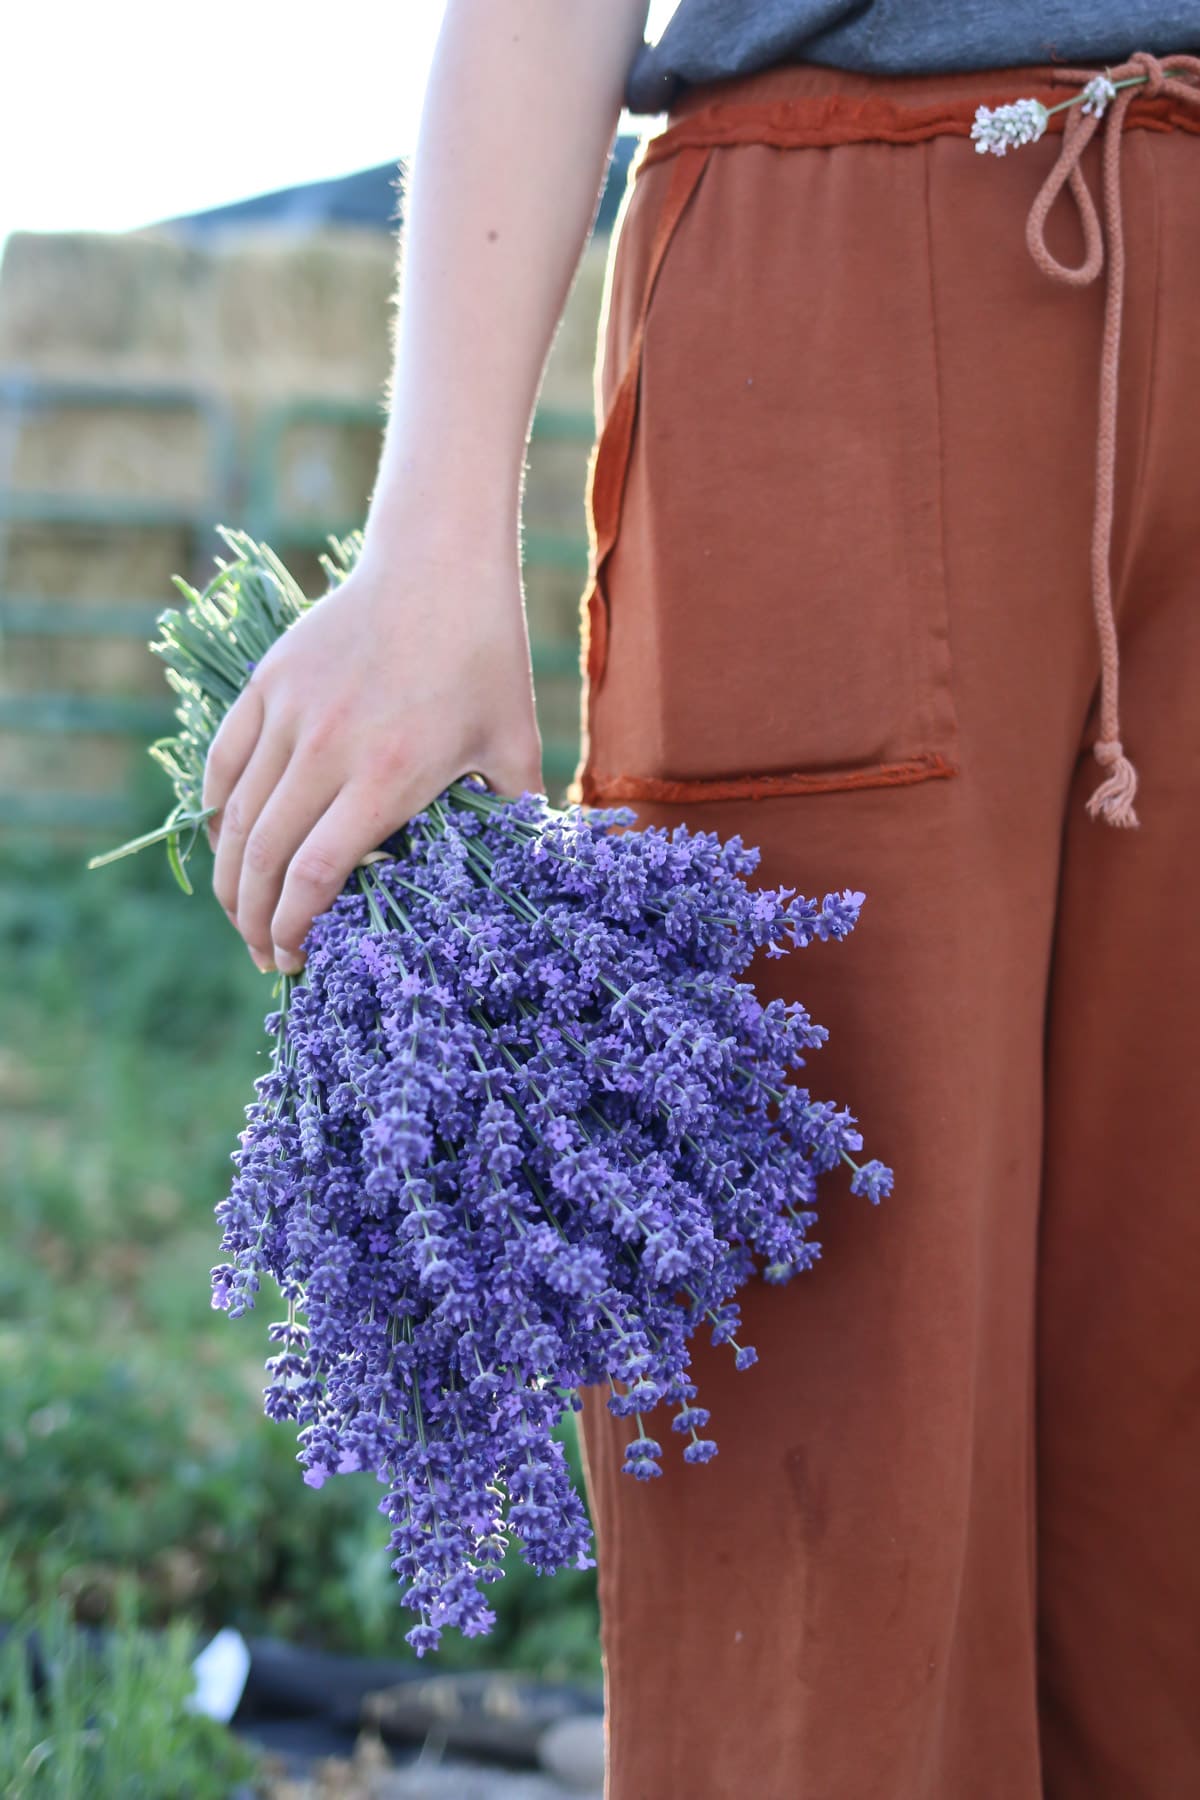 A girl holds a bundle of lavender in her hand